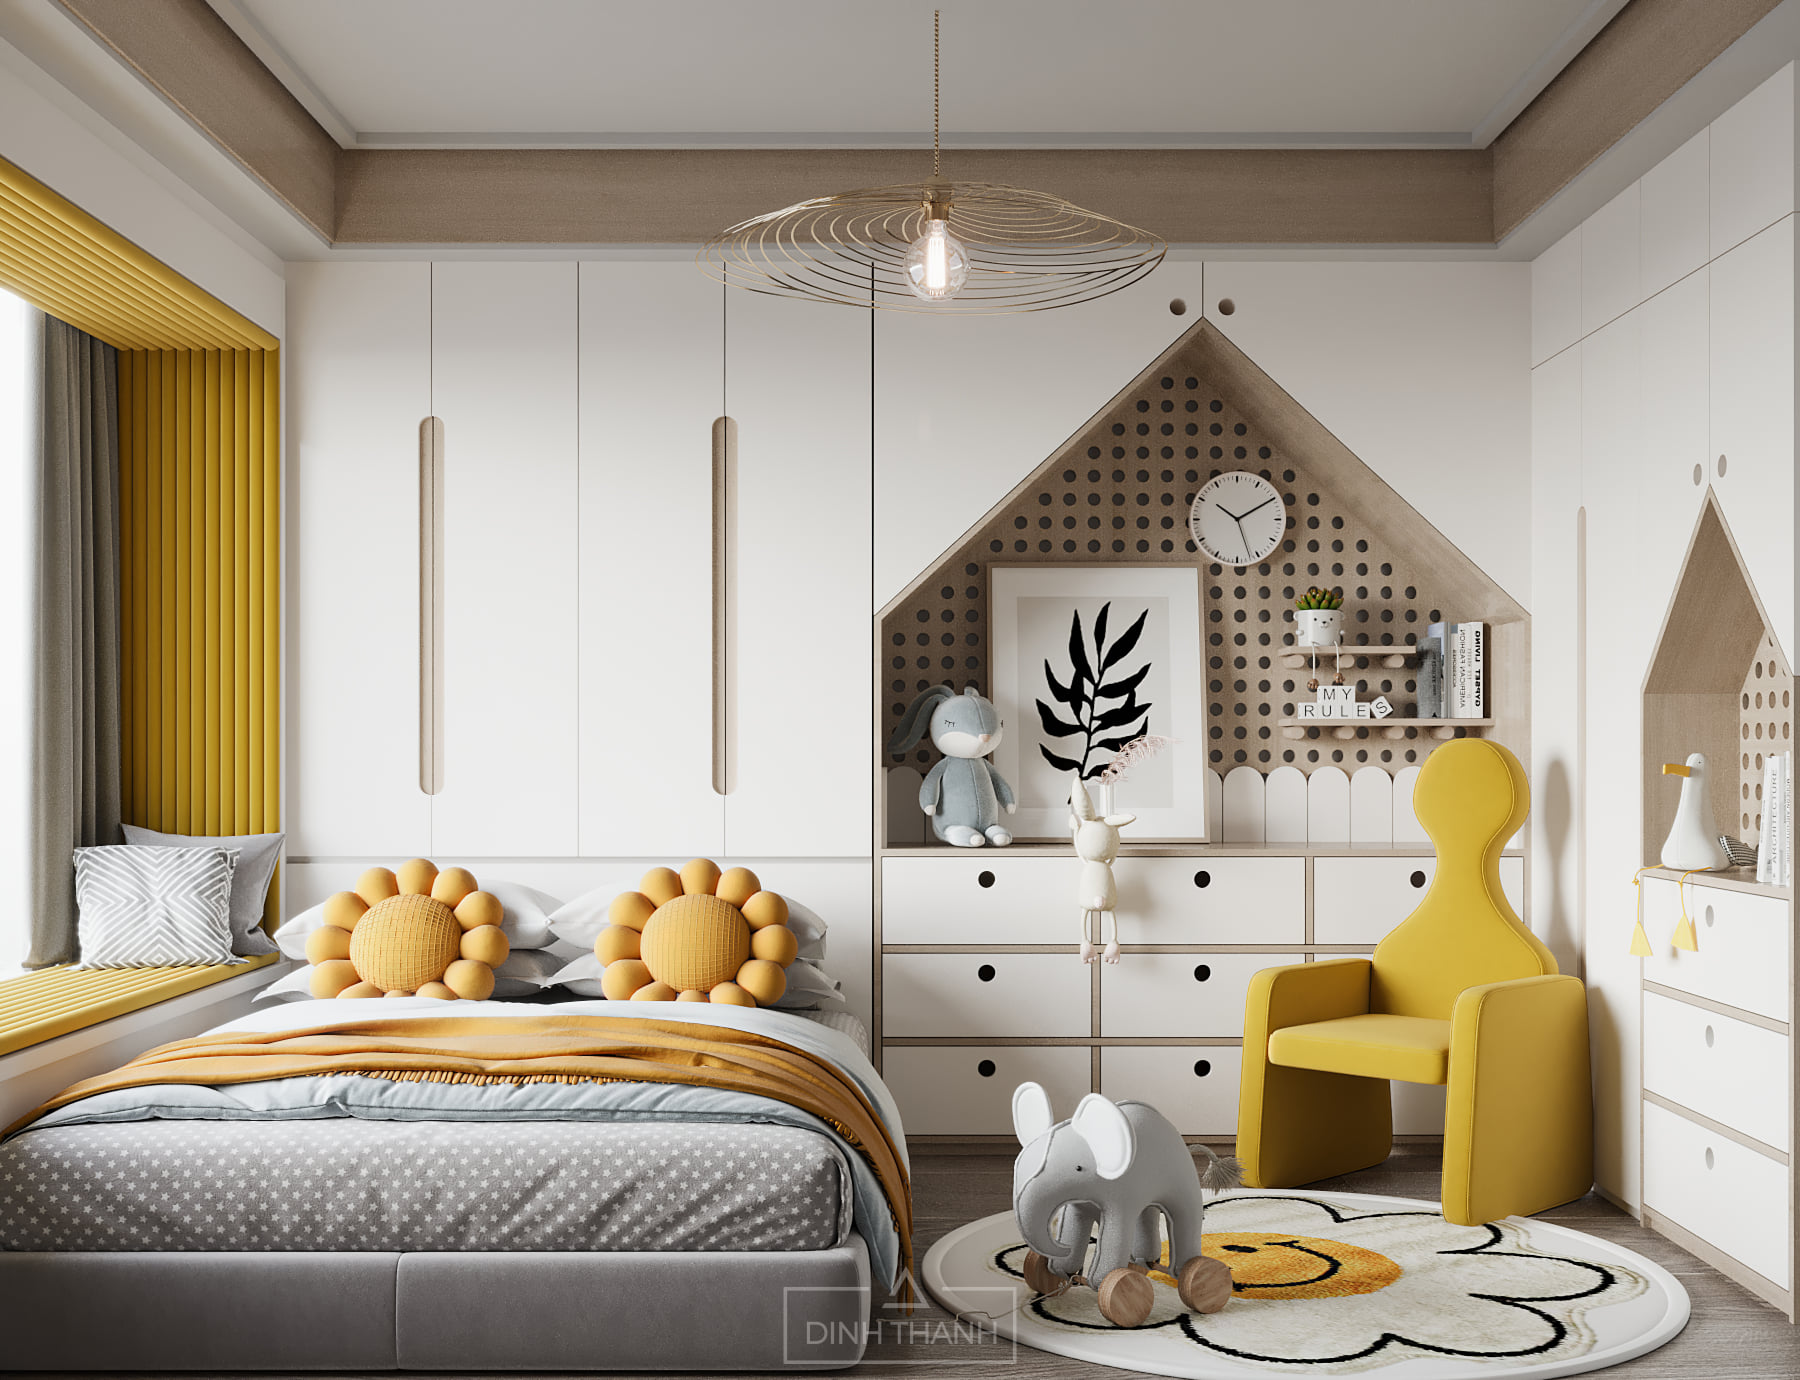  Children Room Interior Sketchup  by Dinh Thanh